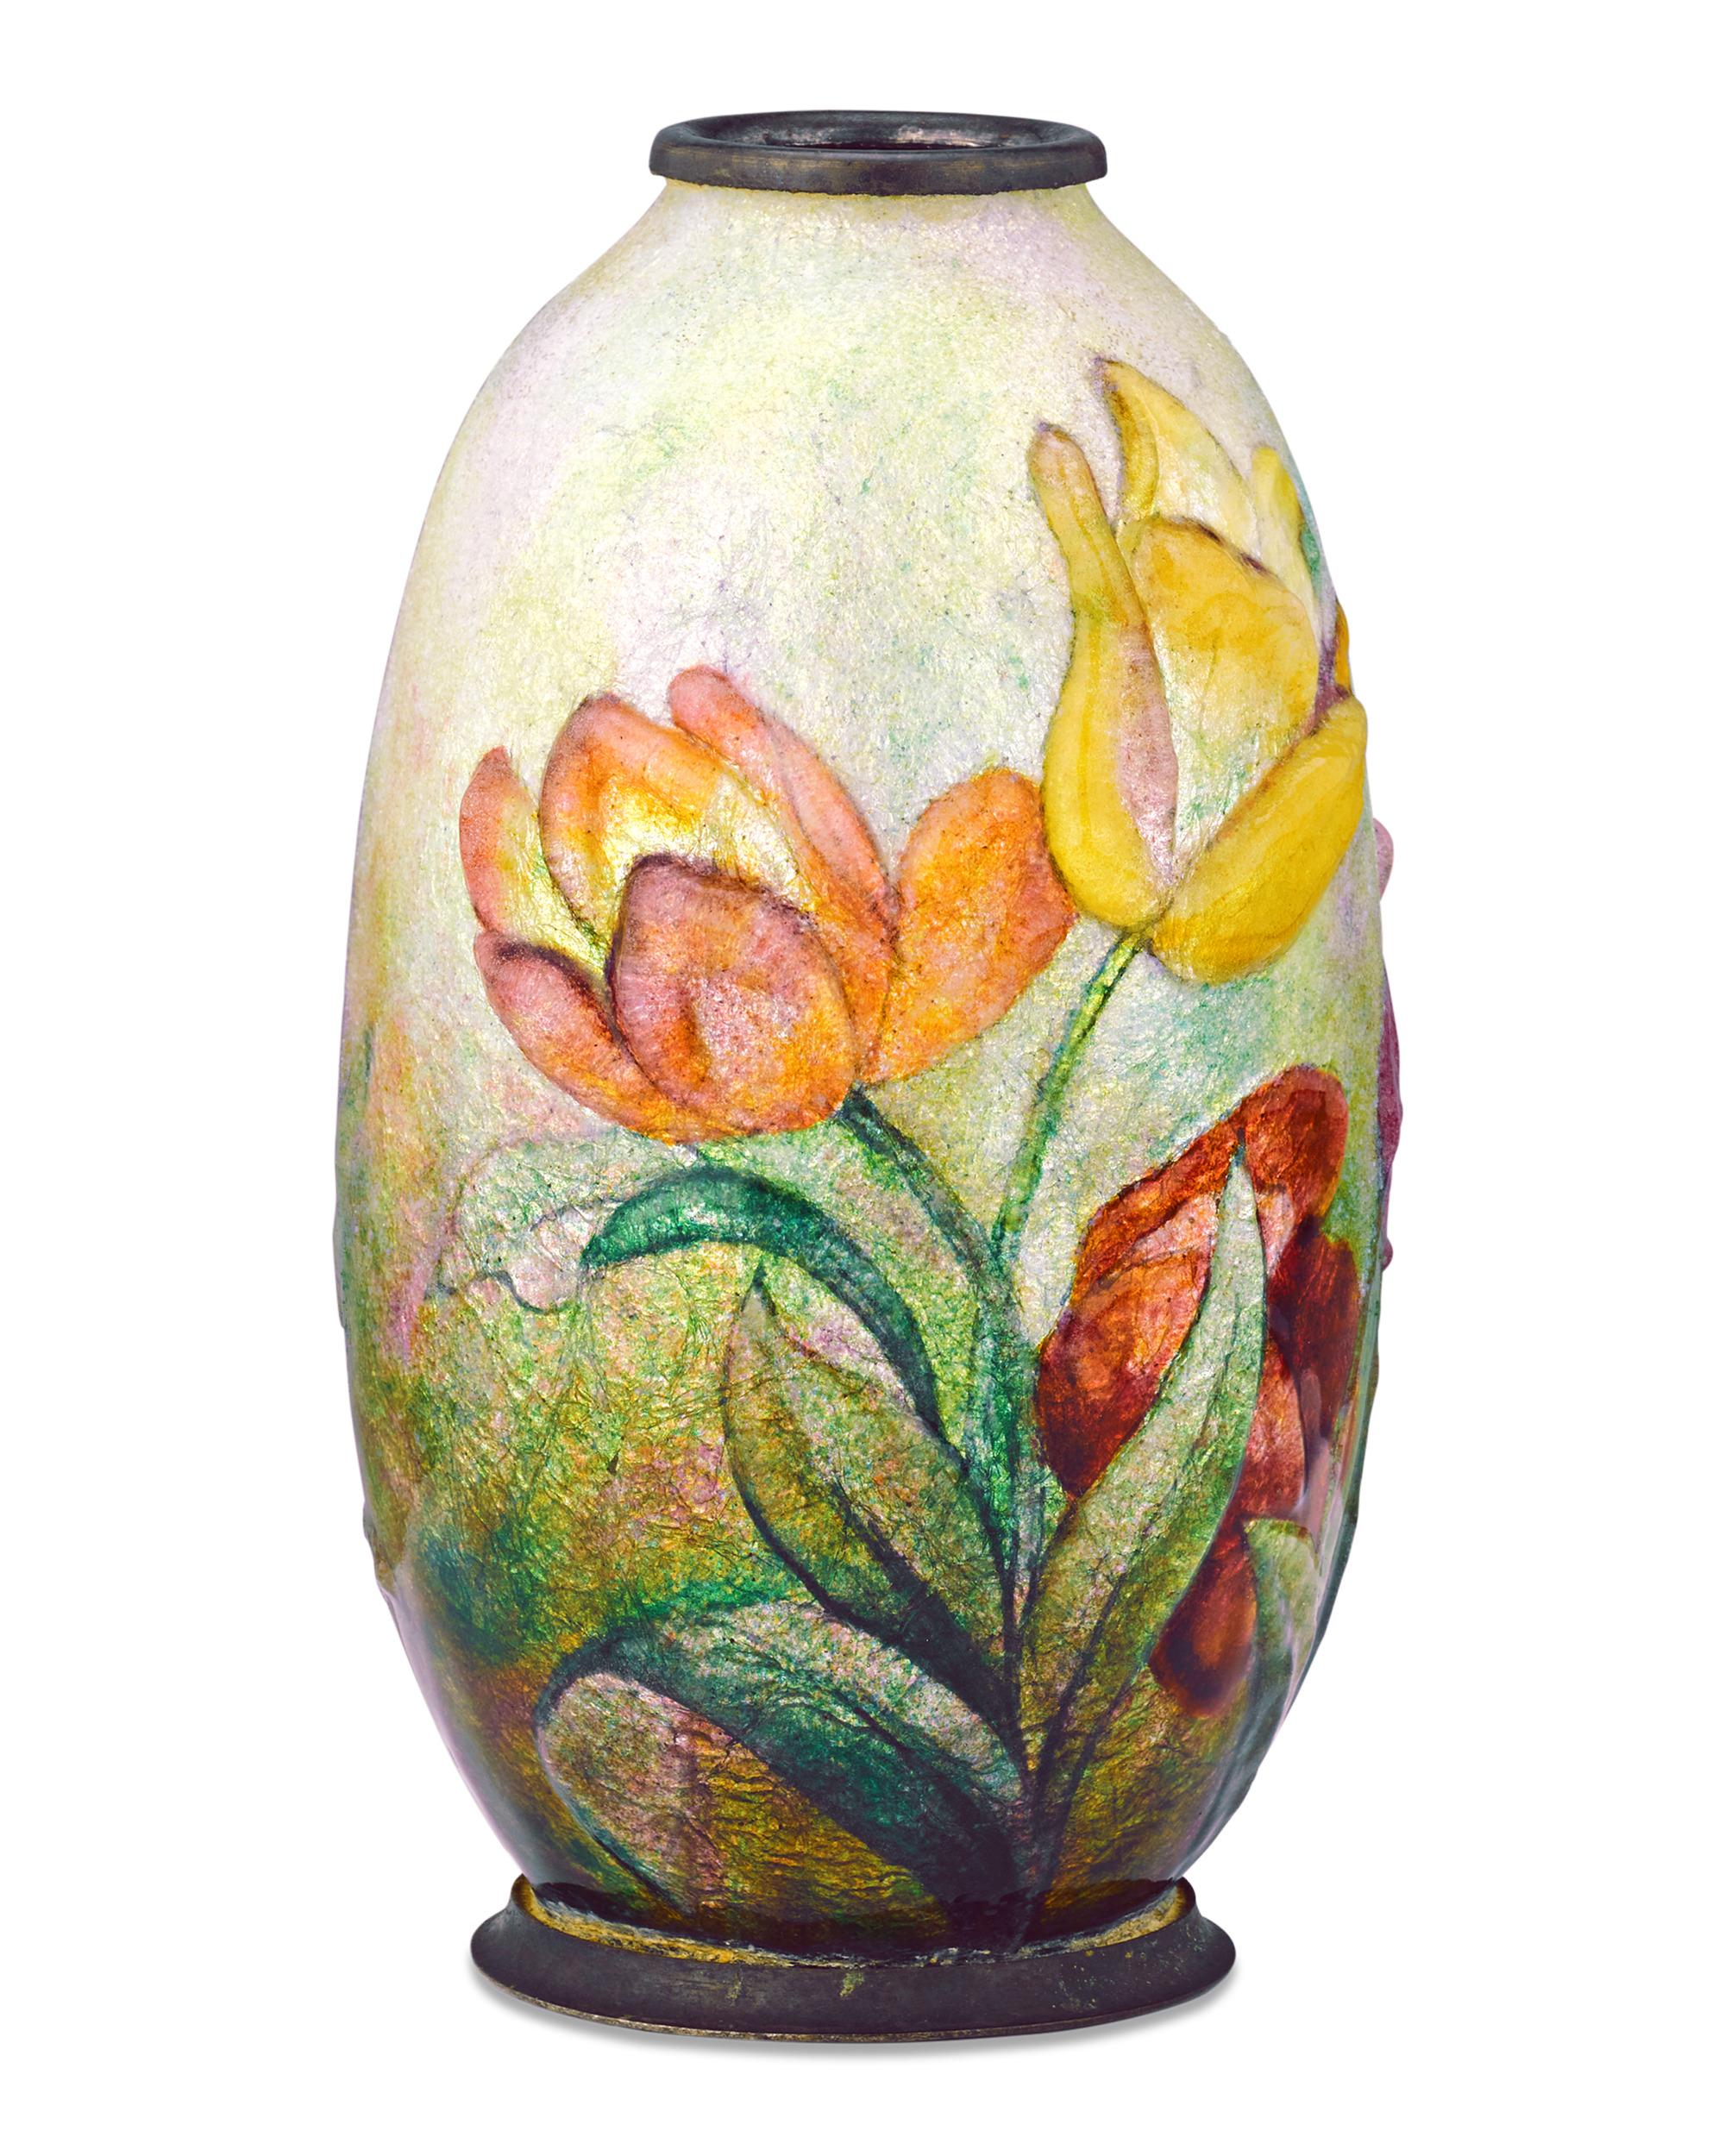 Featuring one of the artist's favorite motifs — intricate and colorful floral designs — this enameled vase by Camille Fauré embodies the artist's highly unique style. Fauré employs his signature raised enameling in this vase, which is achieved by